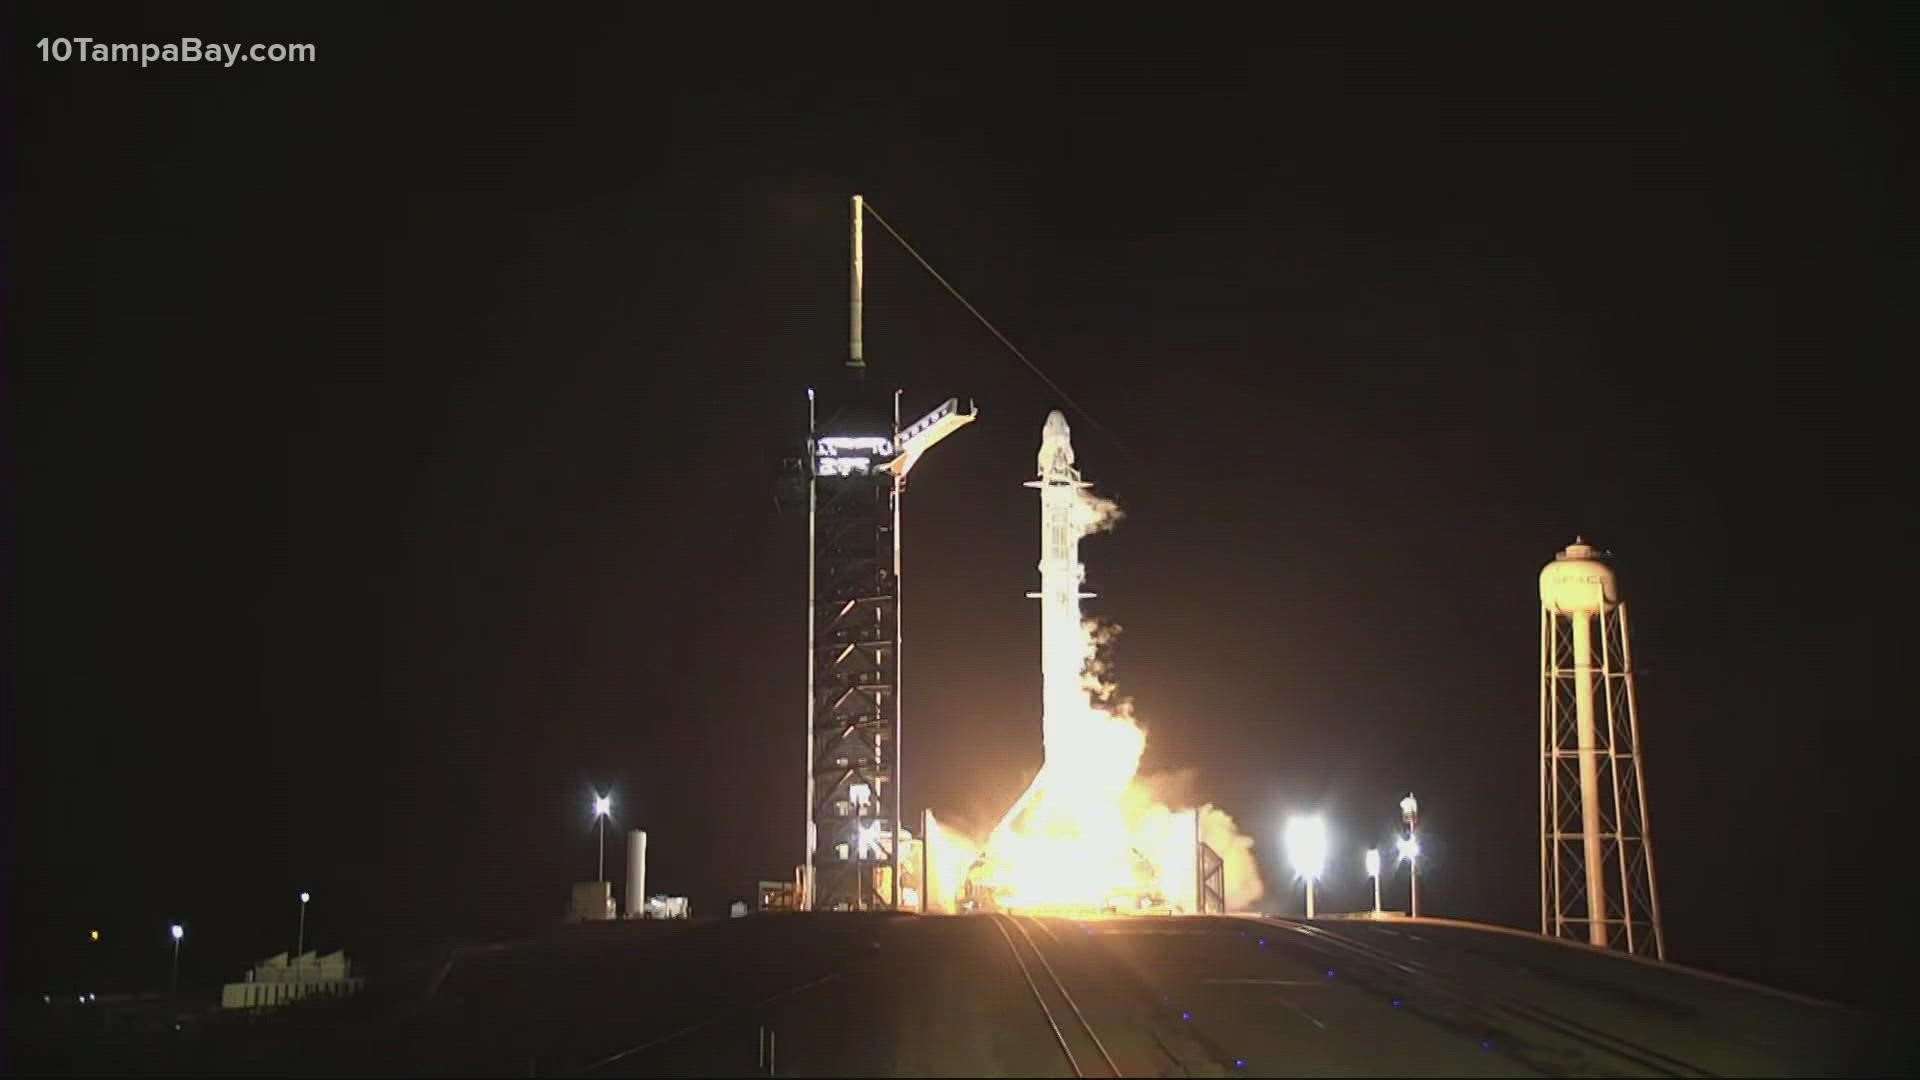 It is SpaceX's fifth flight with astronauts as part of NASA's Commercial Crew Program.